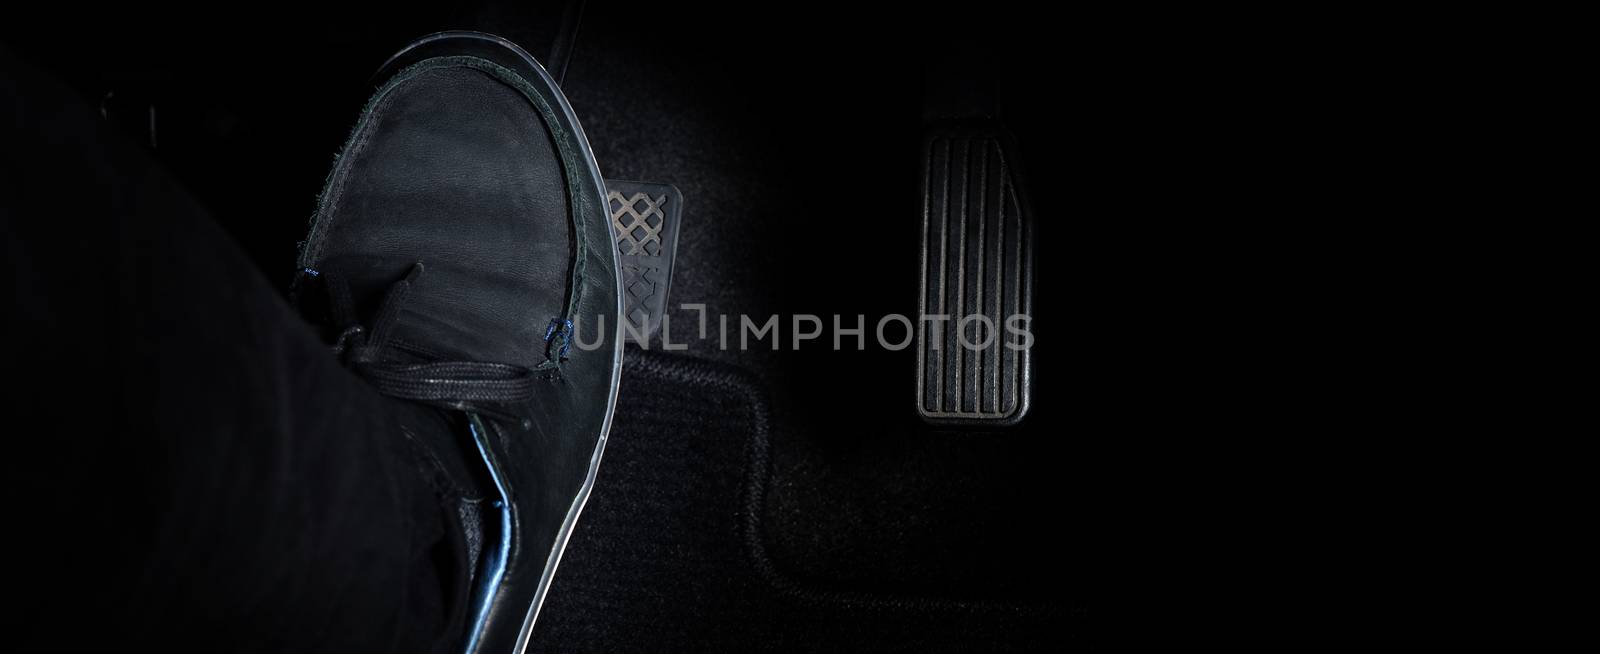 Man foot and accelerator and brake pedal inside the car or vehic by gnepphoto